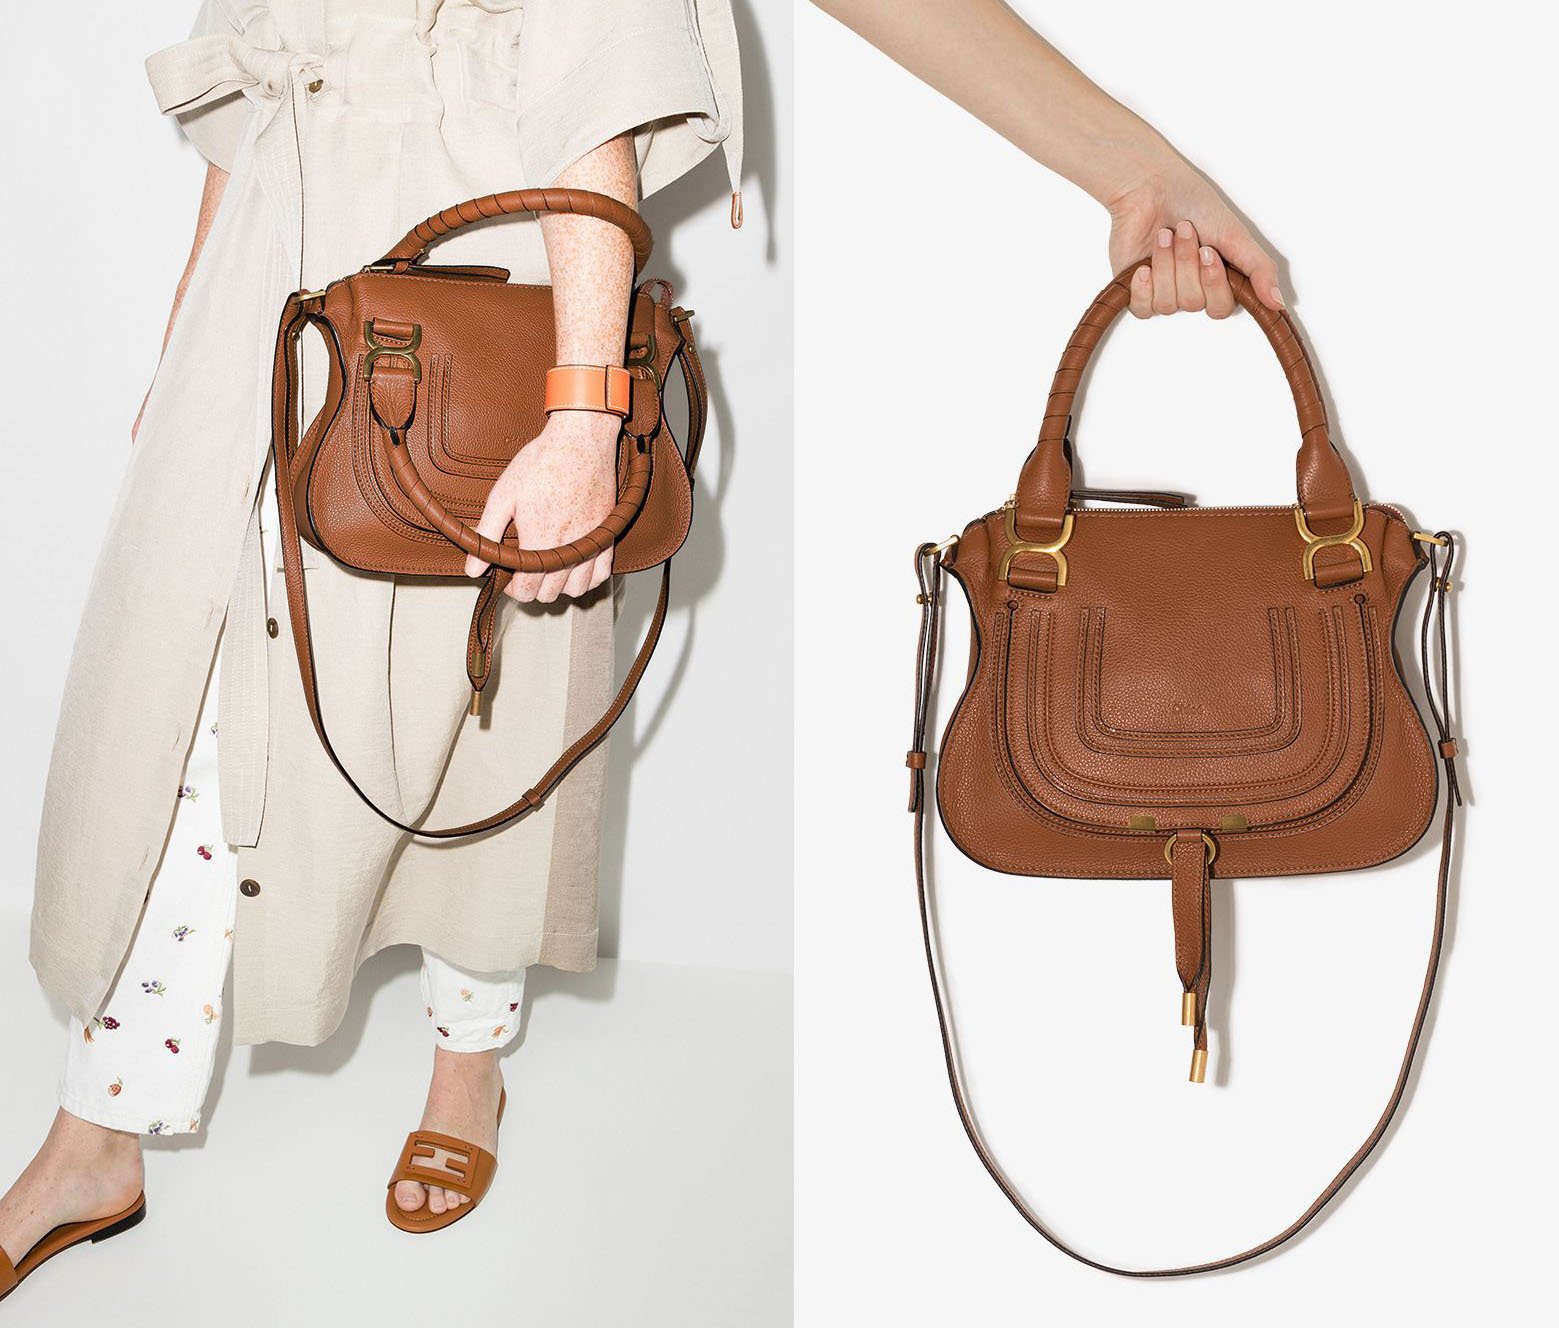 A '70s boho-style bag, the Chloe Marcie is crafted from tan-brown grainy leather and boasts saddle-style stitches and hand-wrapped top handles